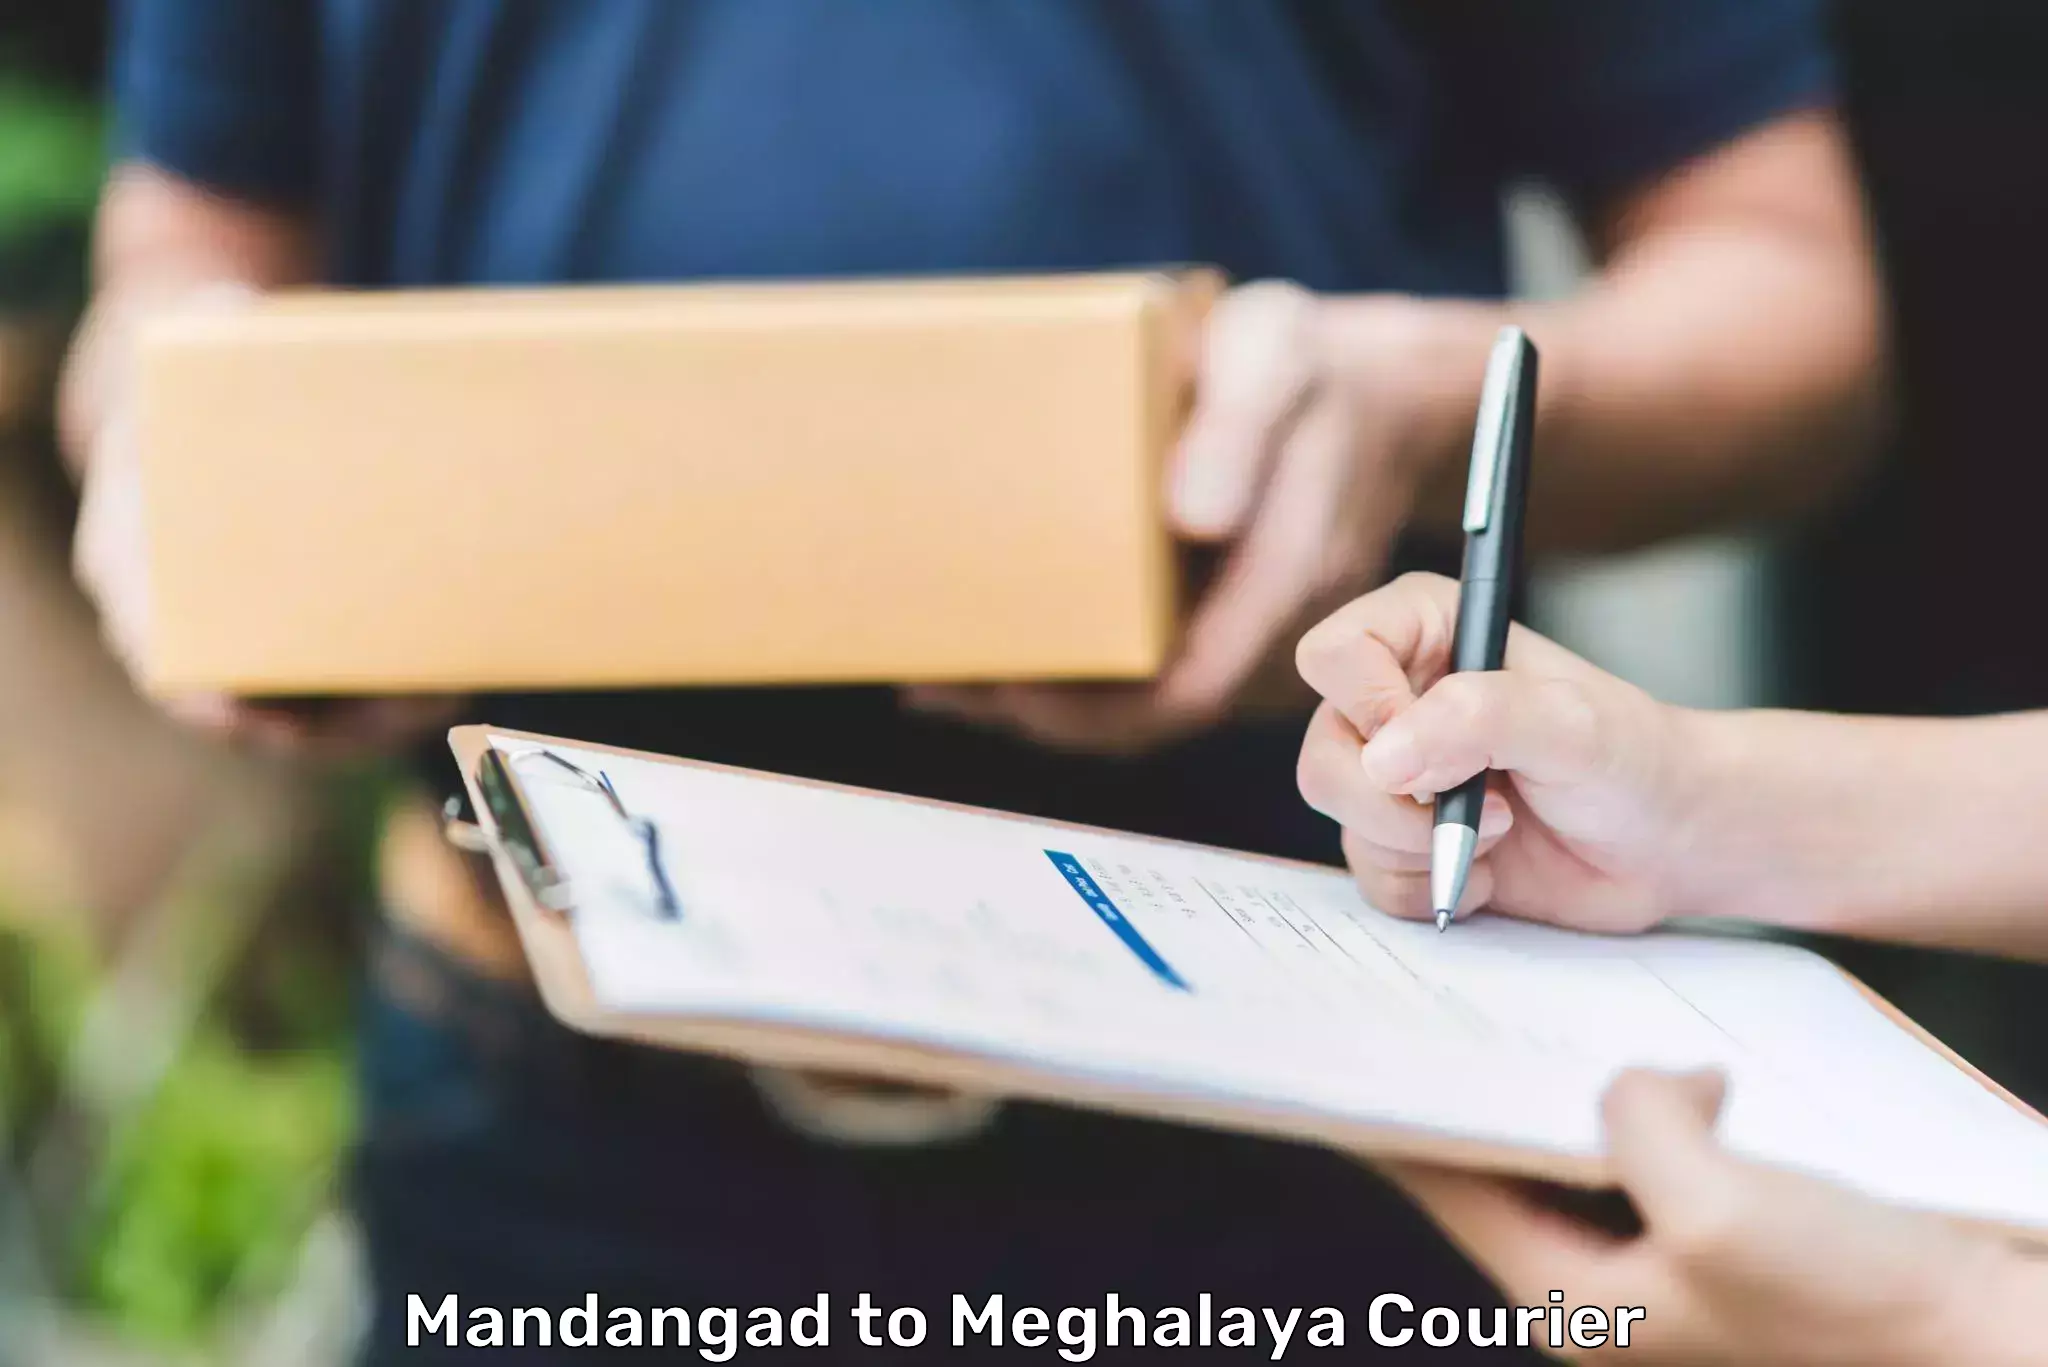 High-priority parcel service Mandangad to Tura